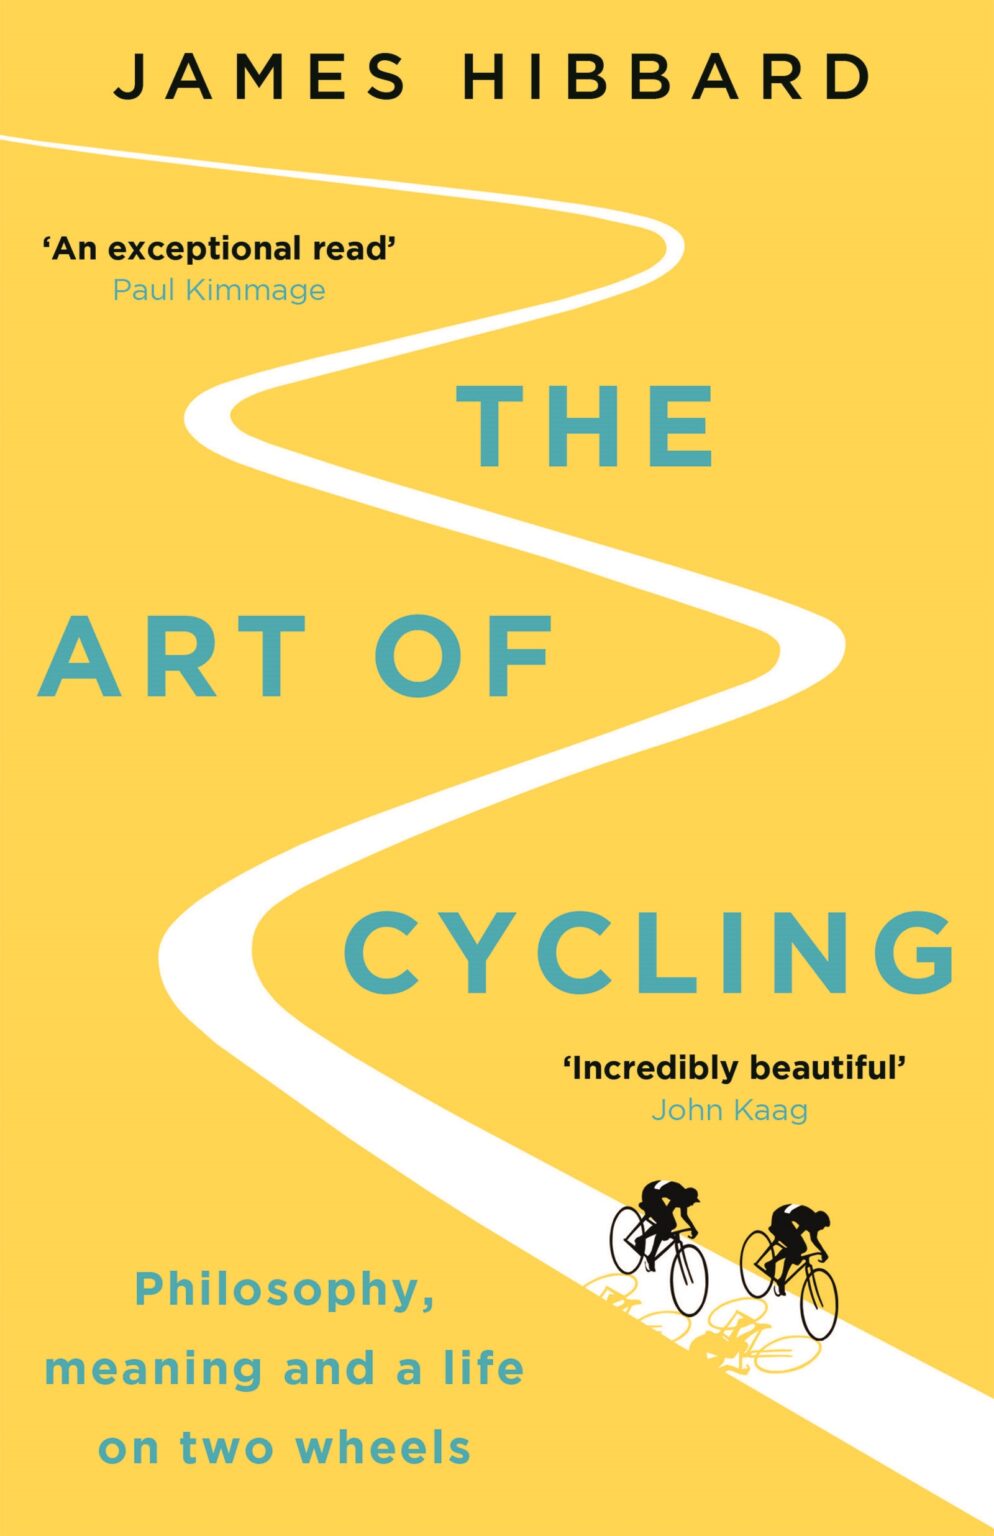 The Art of Cycling by James Hibbard